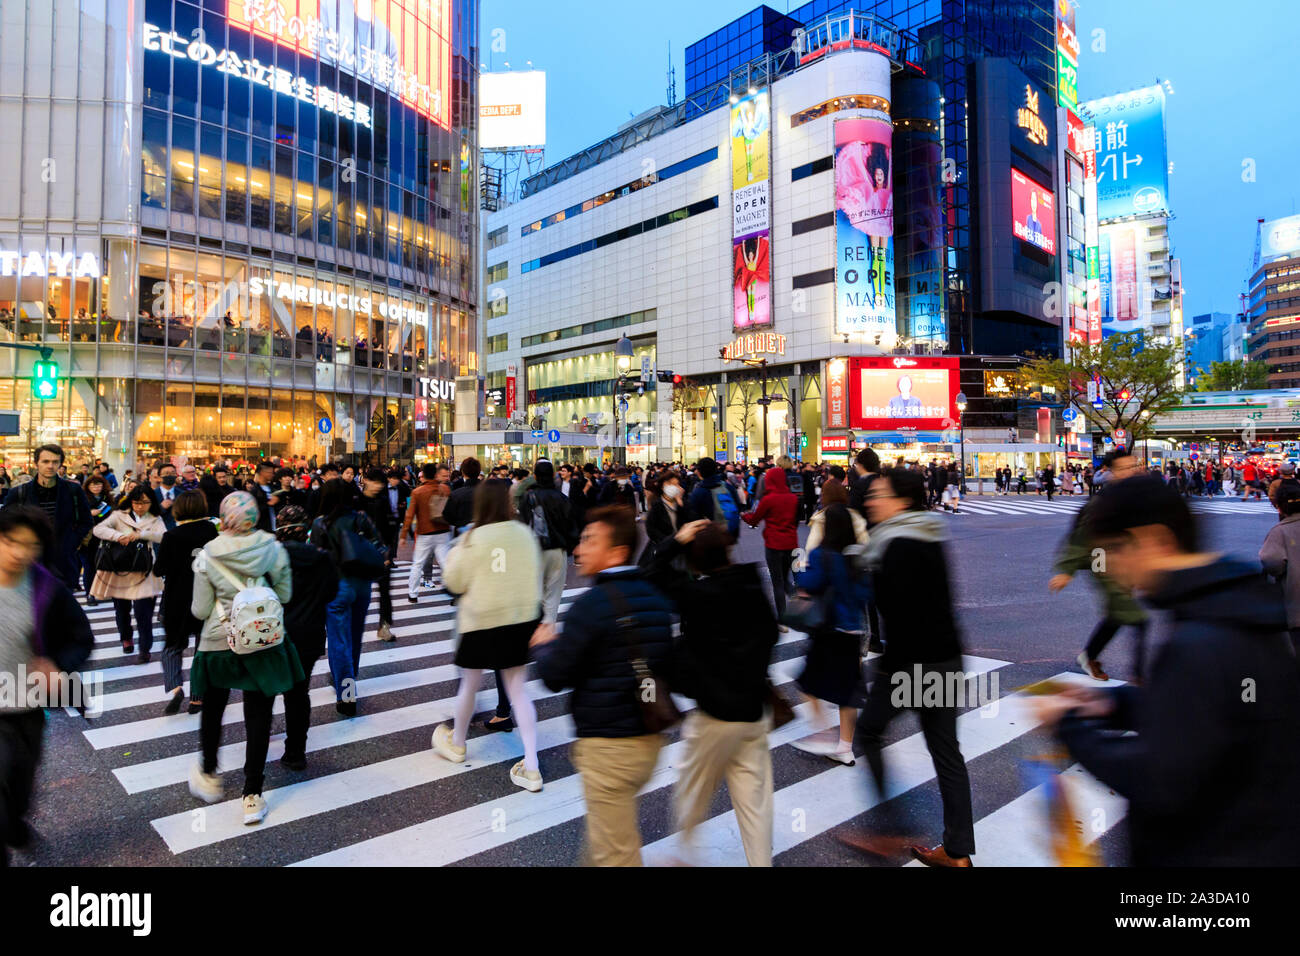 Tokyo. Shibuya. The famous landmark busy scramble crossing, with people crossing the street, motion blur. Evening blue hour, buildings illuminated. Stock Photo